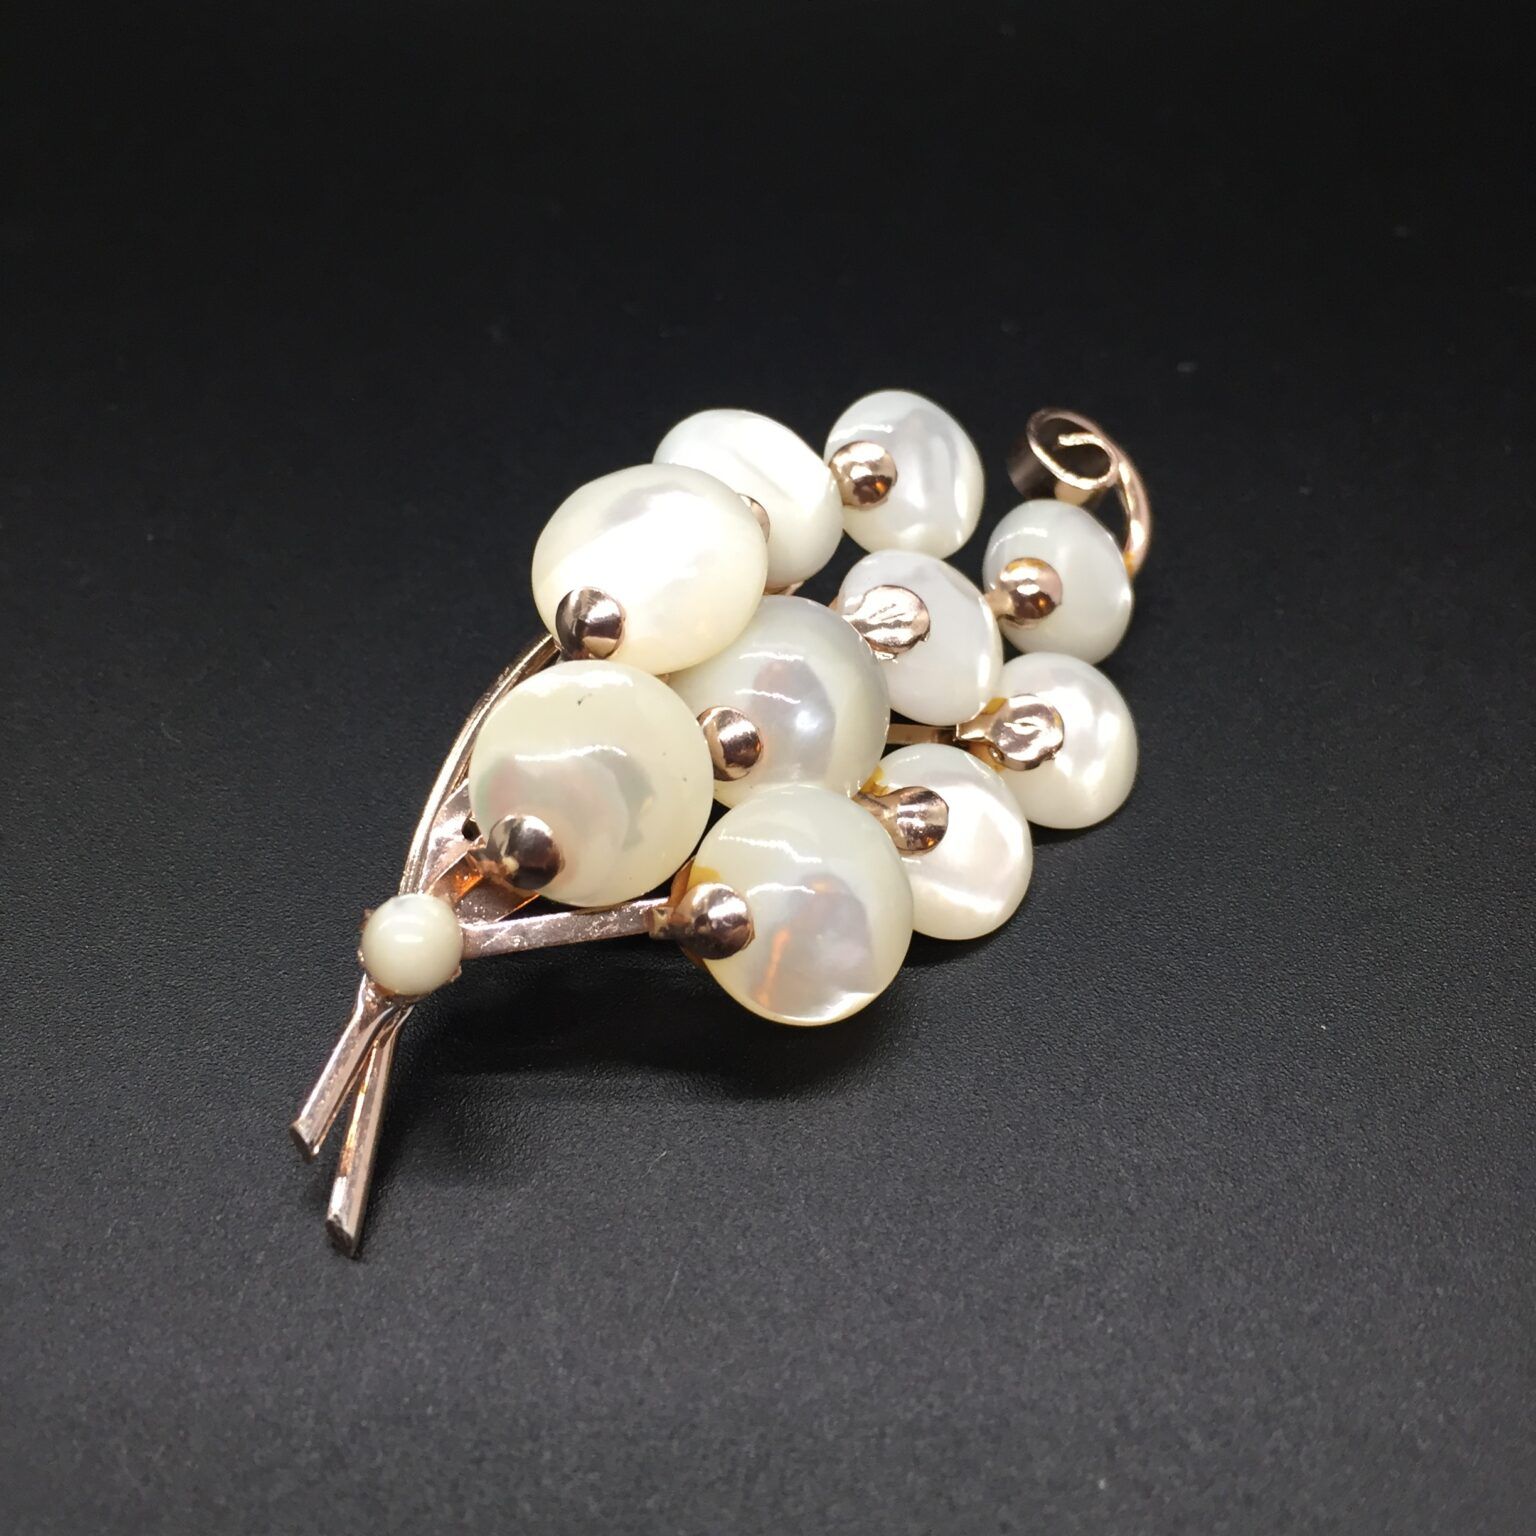 Lovely Mother-of-Pearl Brooch